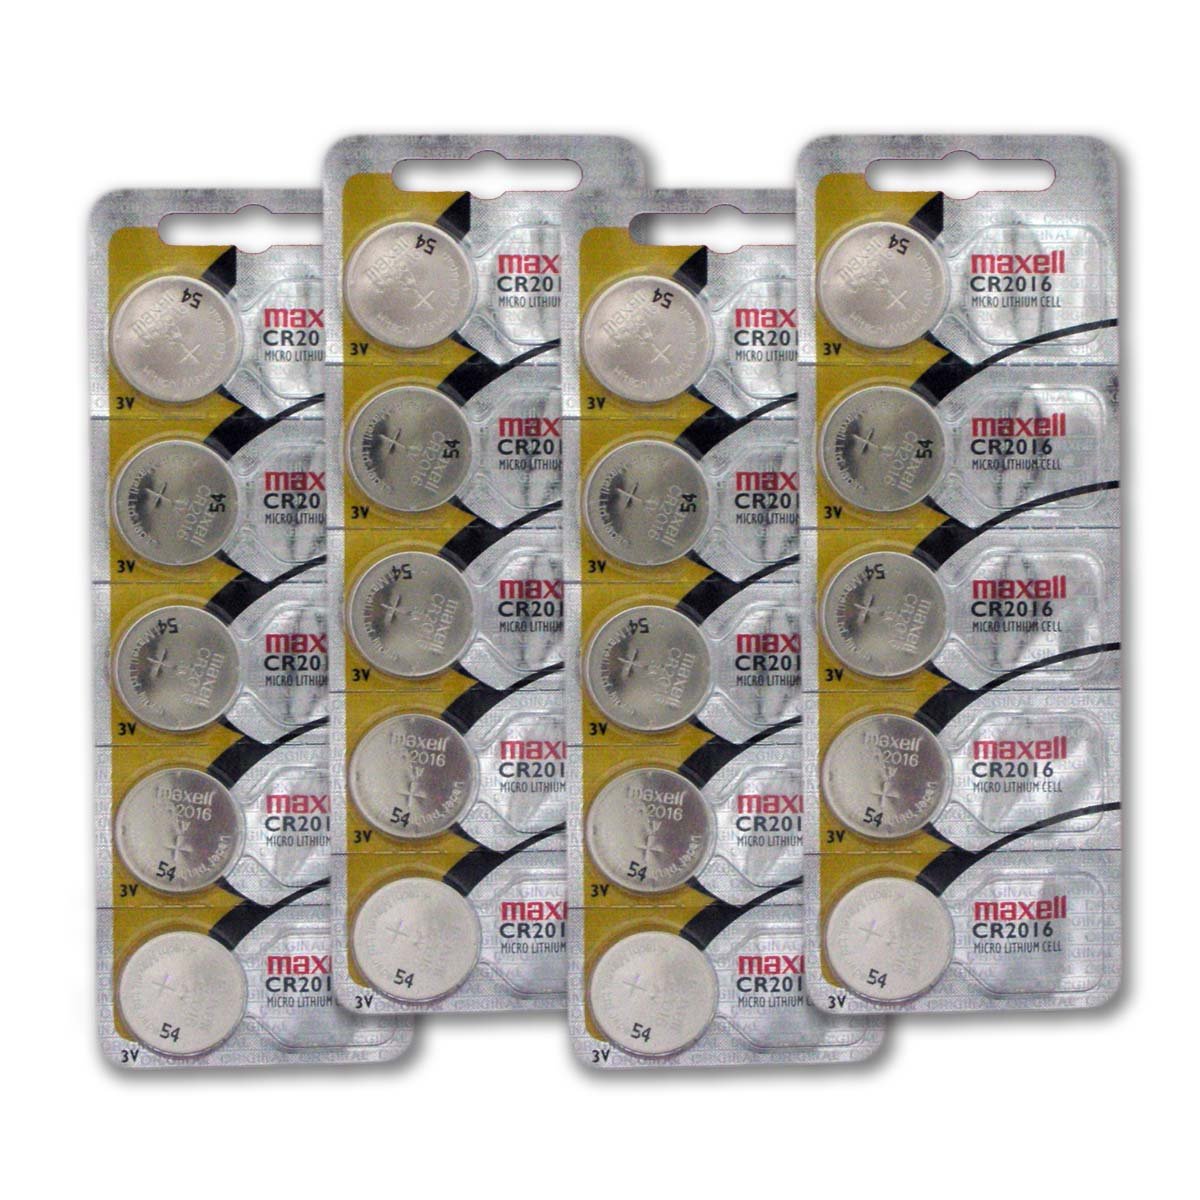 CR2016 3V Micro Lithium coin Cell Battery Maxell Original Hologram pack CR-2016 - 20 Pack